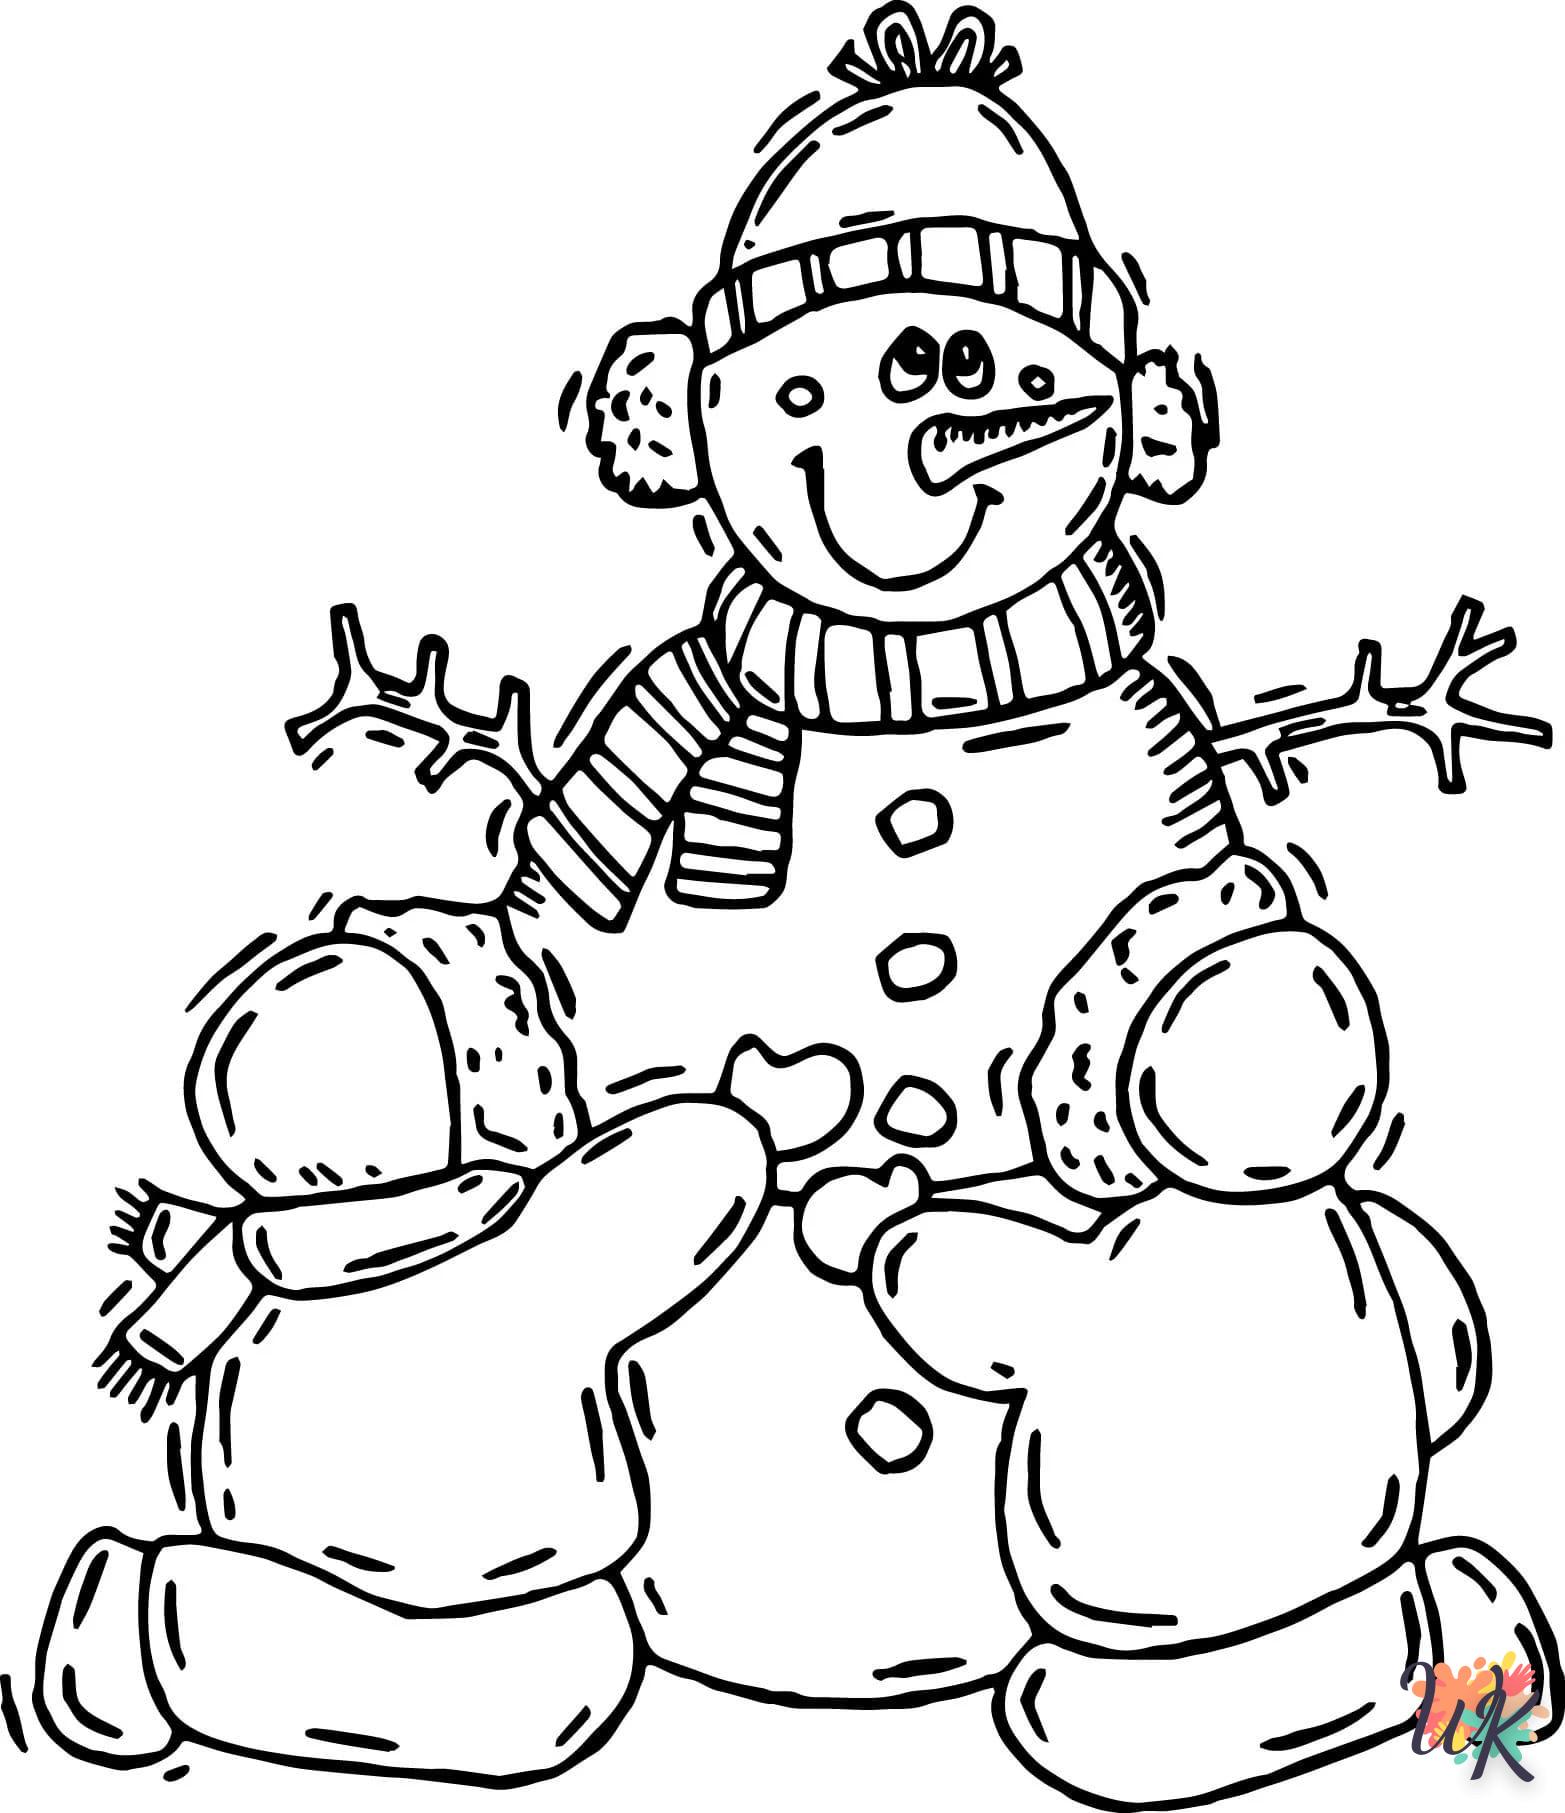 Snowman coloring page to print for free